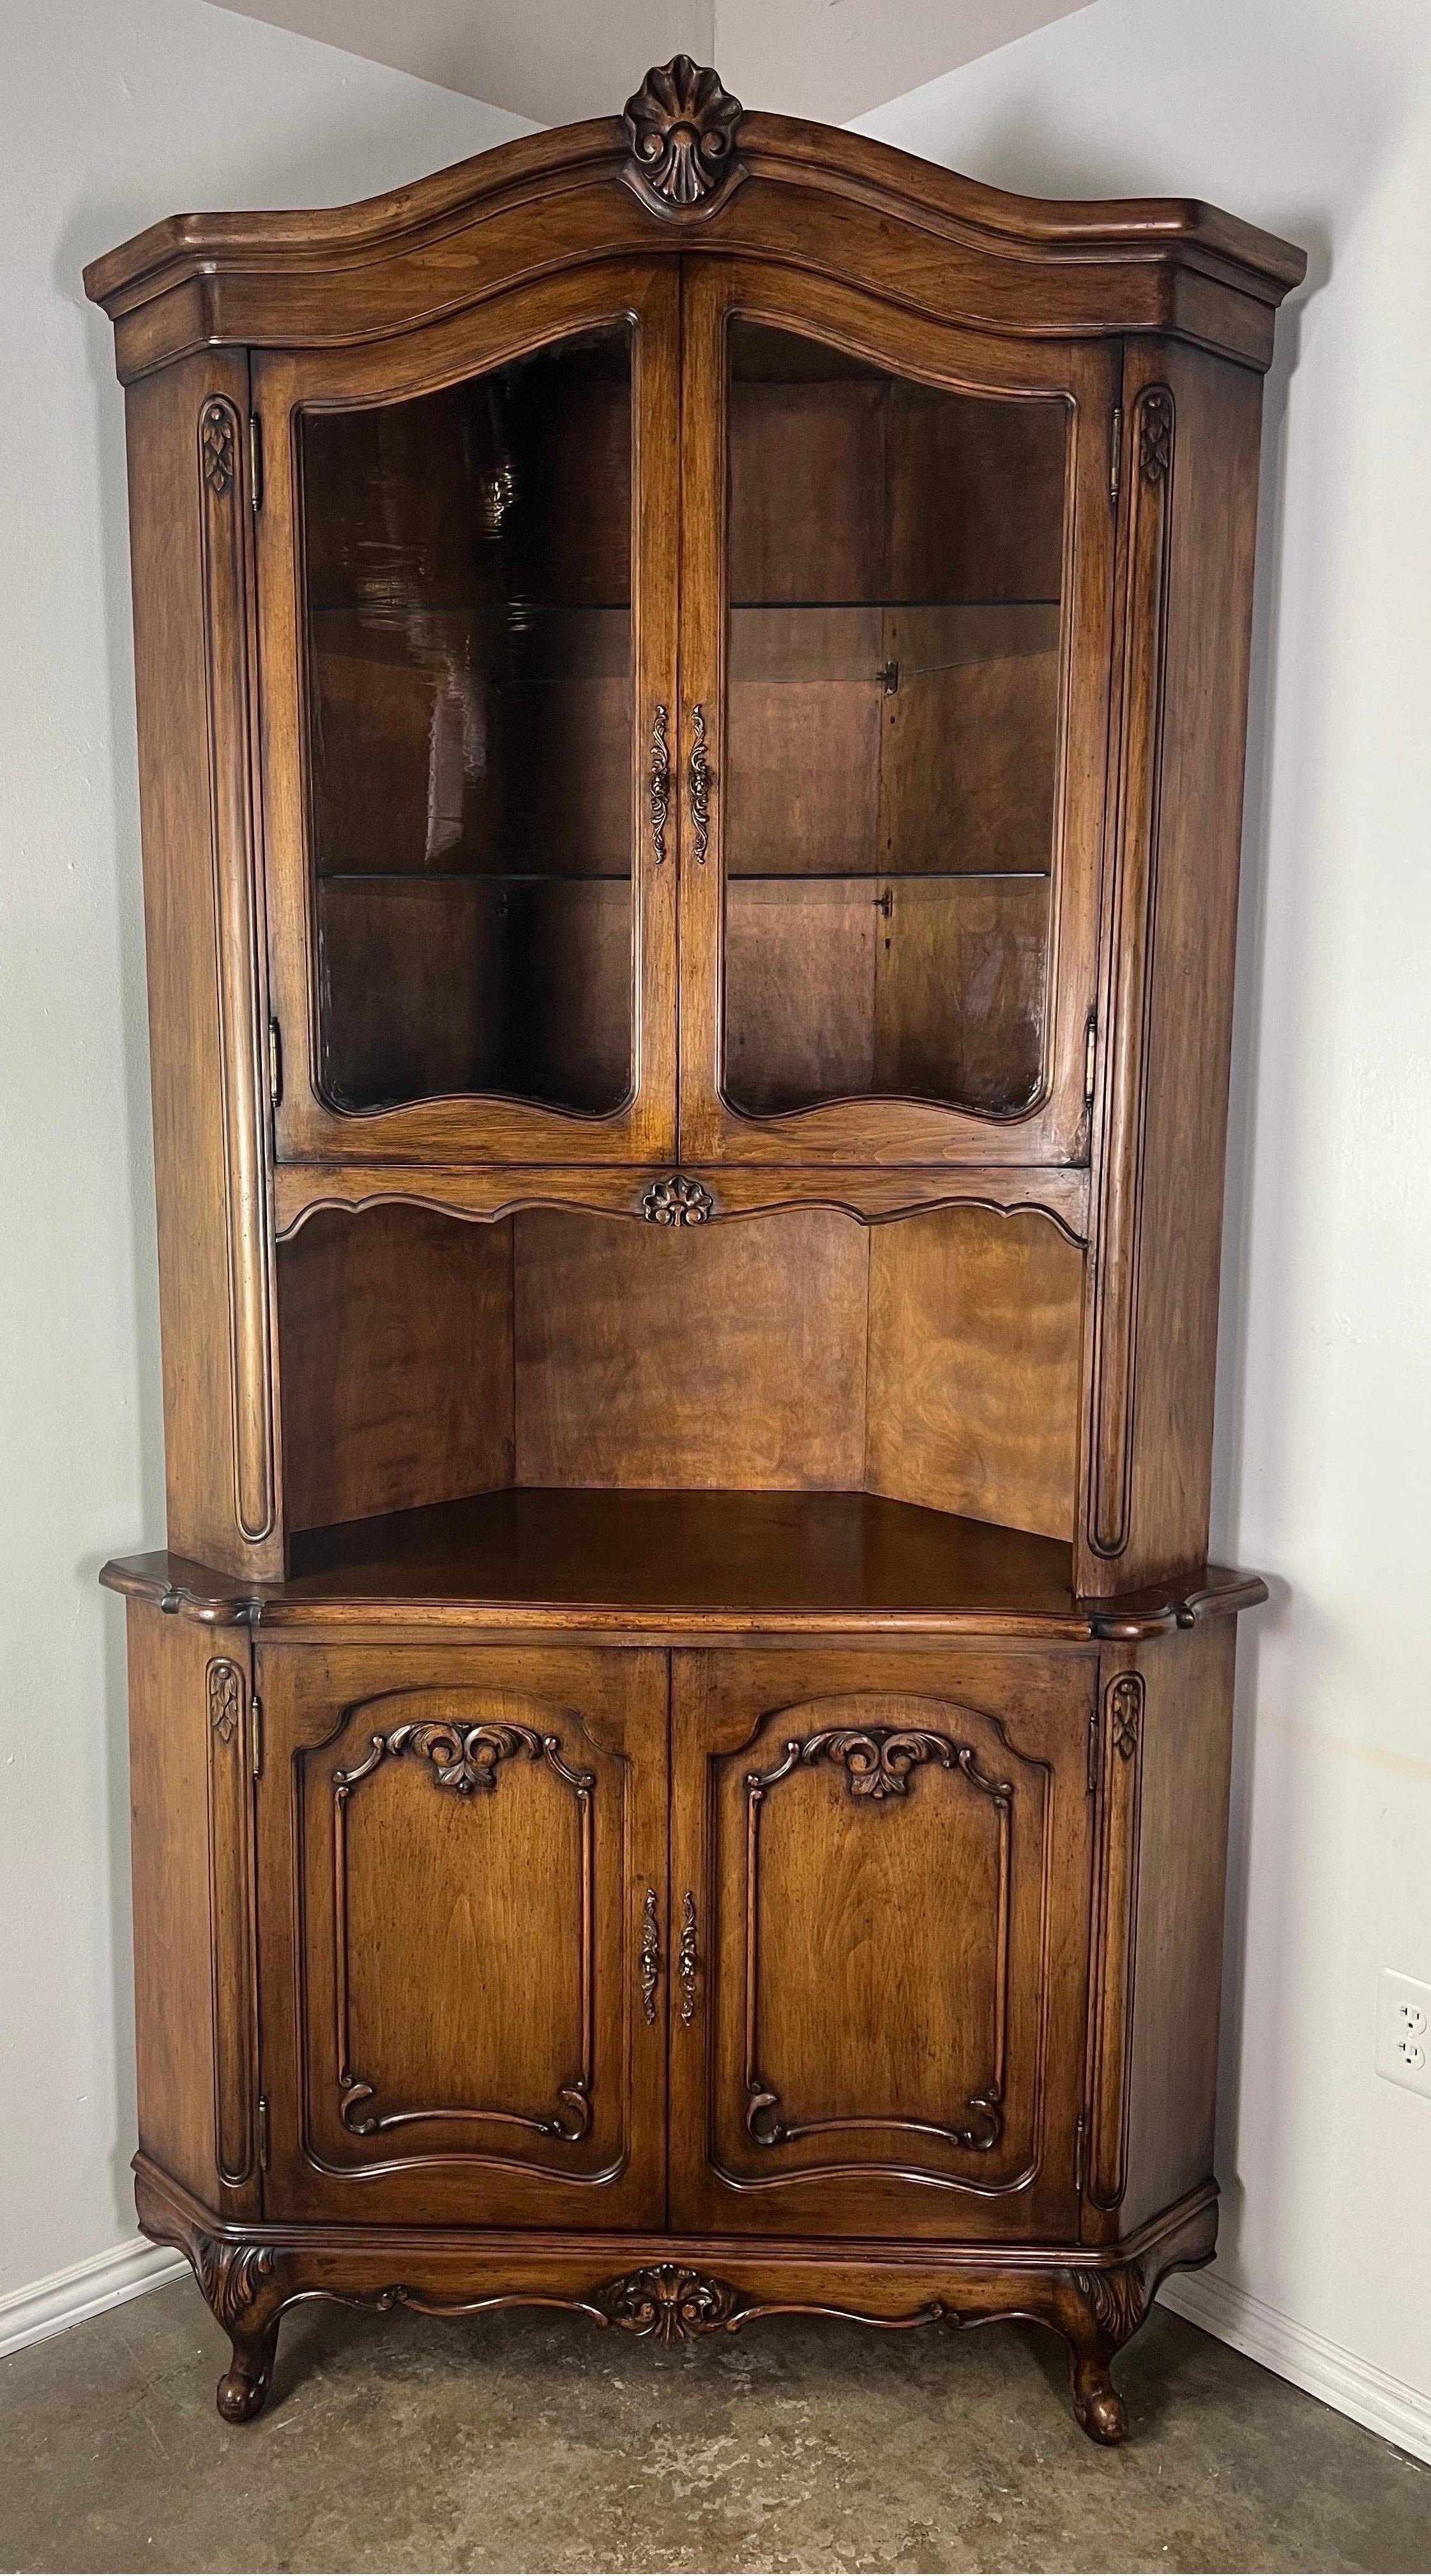 Pair of French Provincial walnut corner cabinets. There are two paneled doors on the bottom for plenty of storage. There are two glass doors on top to display your treasures.